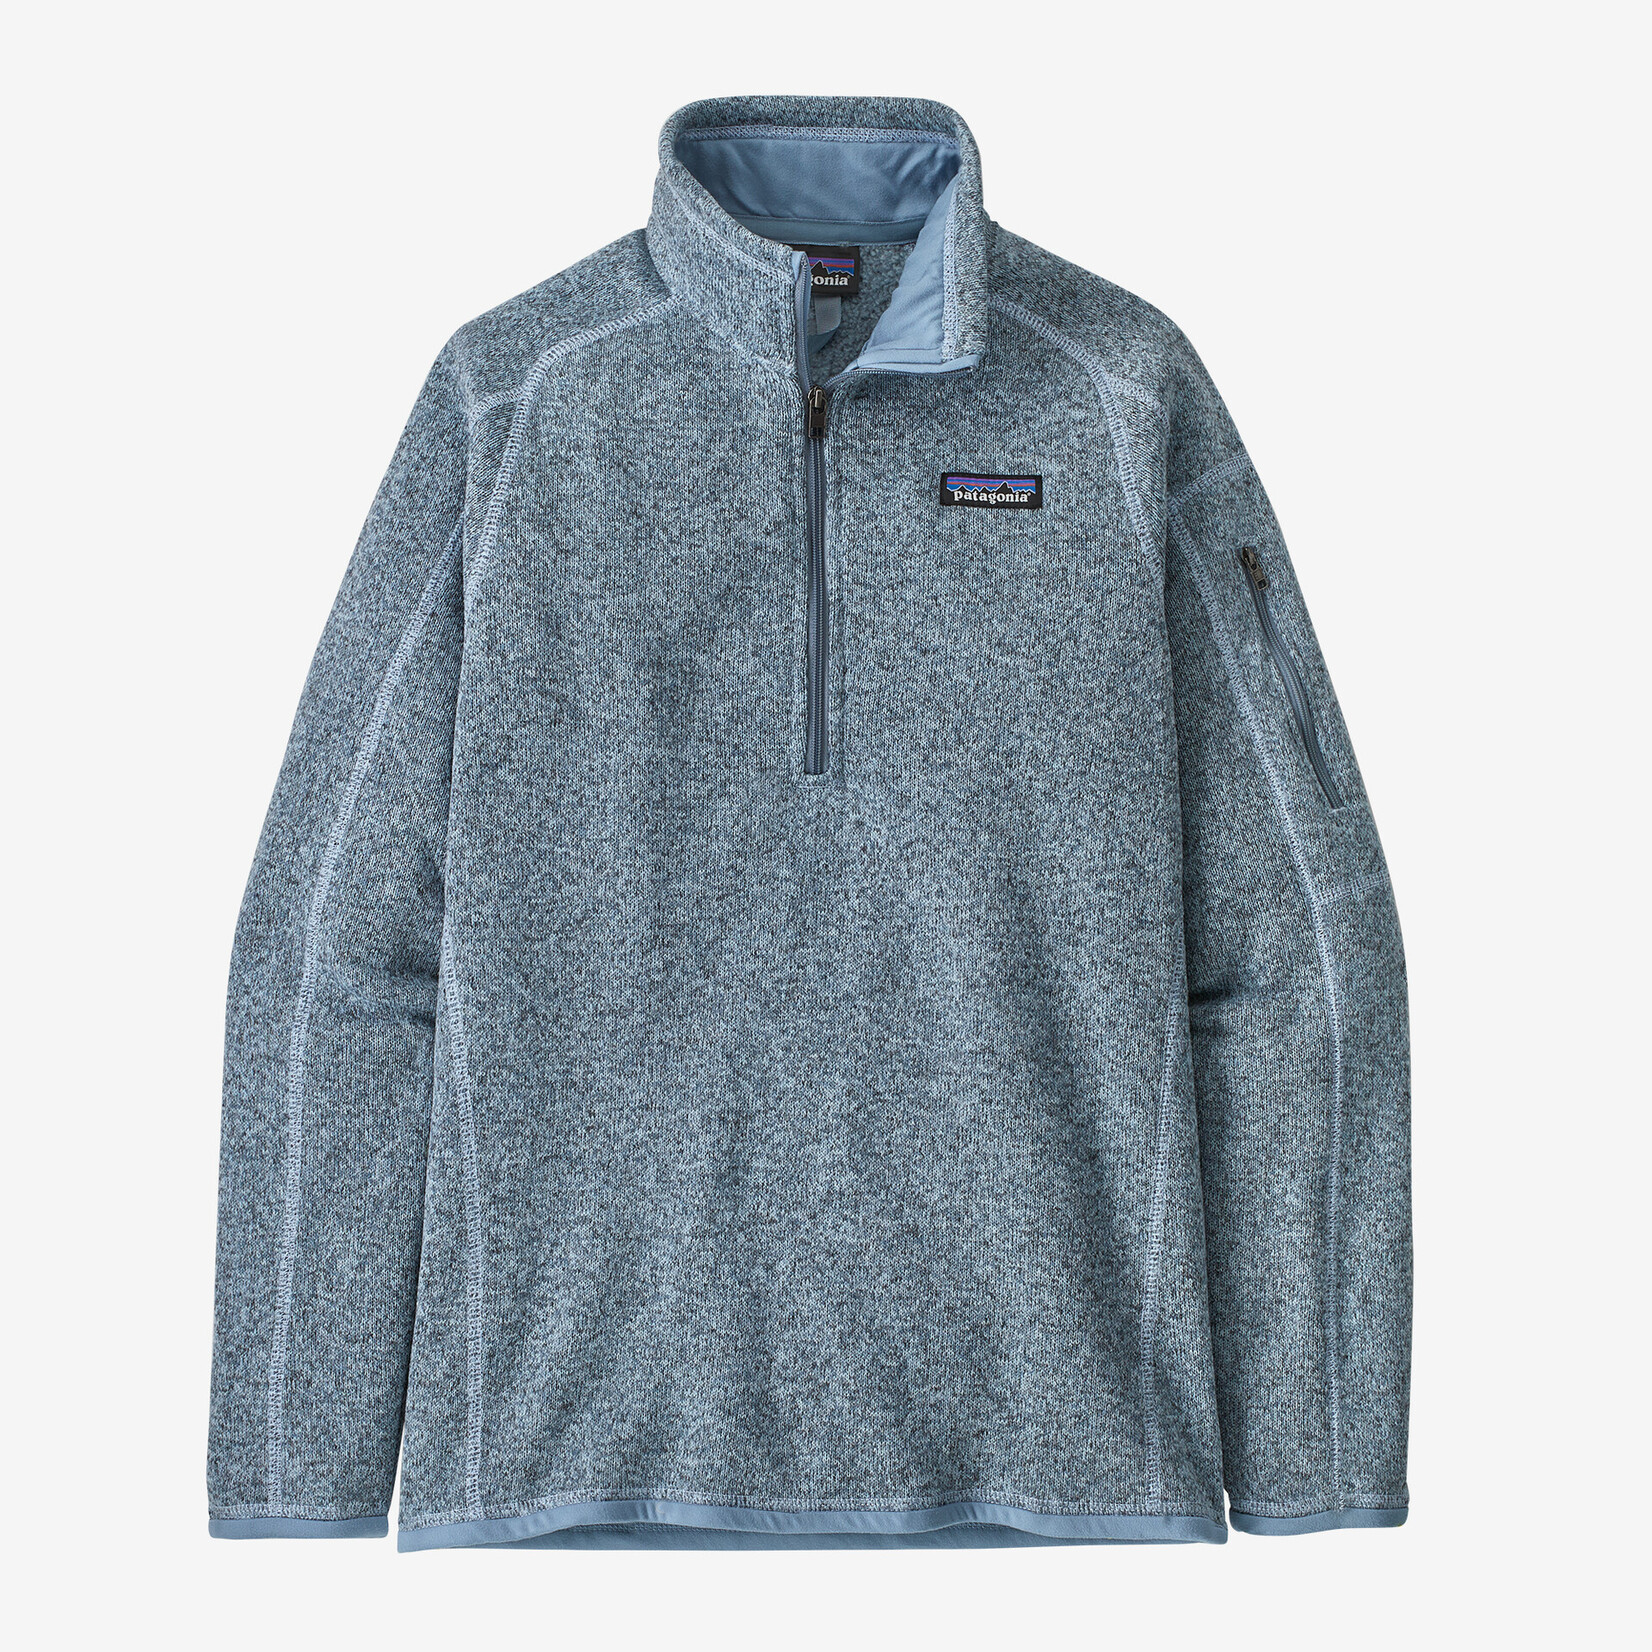 Patagonia W’s better sweater 1/4